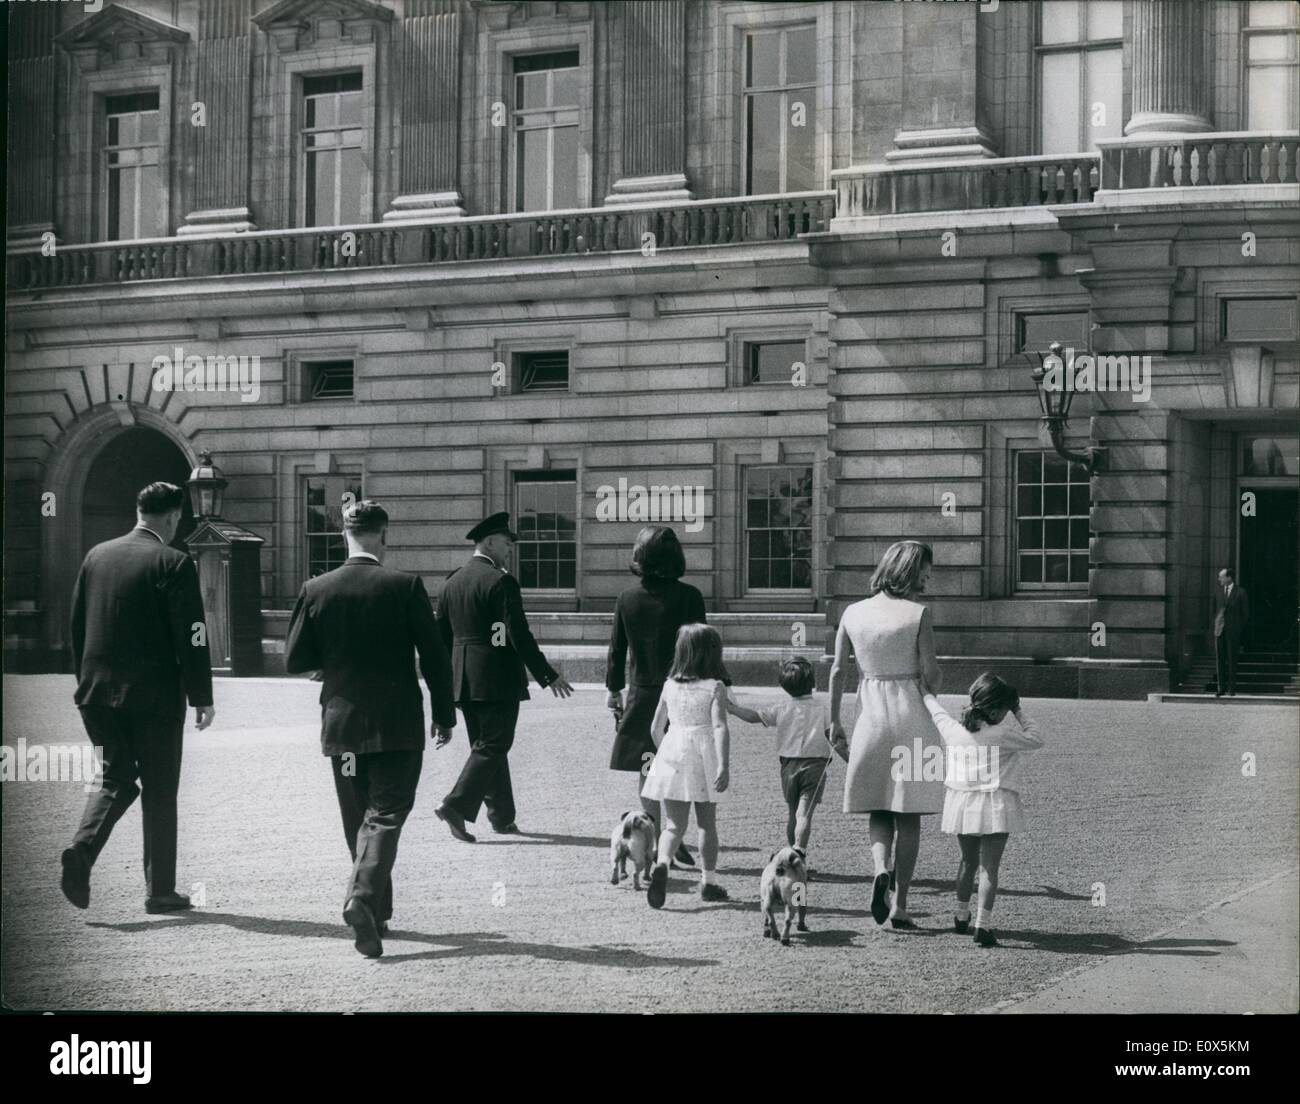 May 05, 1965 - Jackie Kennedy and her sister go to Buckingham Palace with their children: Mrs. Jacquline Kennedy and her two children John, 5, and Caroline, 7, accompanied by her sister, Princess Radziwill, and her two children, walked from the Radziwill home in Buckingham Palace, through the park to Buckingham Palace today. They were invited inside to watch the ceremonial changing of the guard. Photo shows Accompanied by a bodyguard Jackie Kennedy (in black) and her sisiter, Princess Radziwill, walk across the forecourt of Buckingham Palace with their children today. Stock Photo